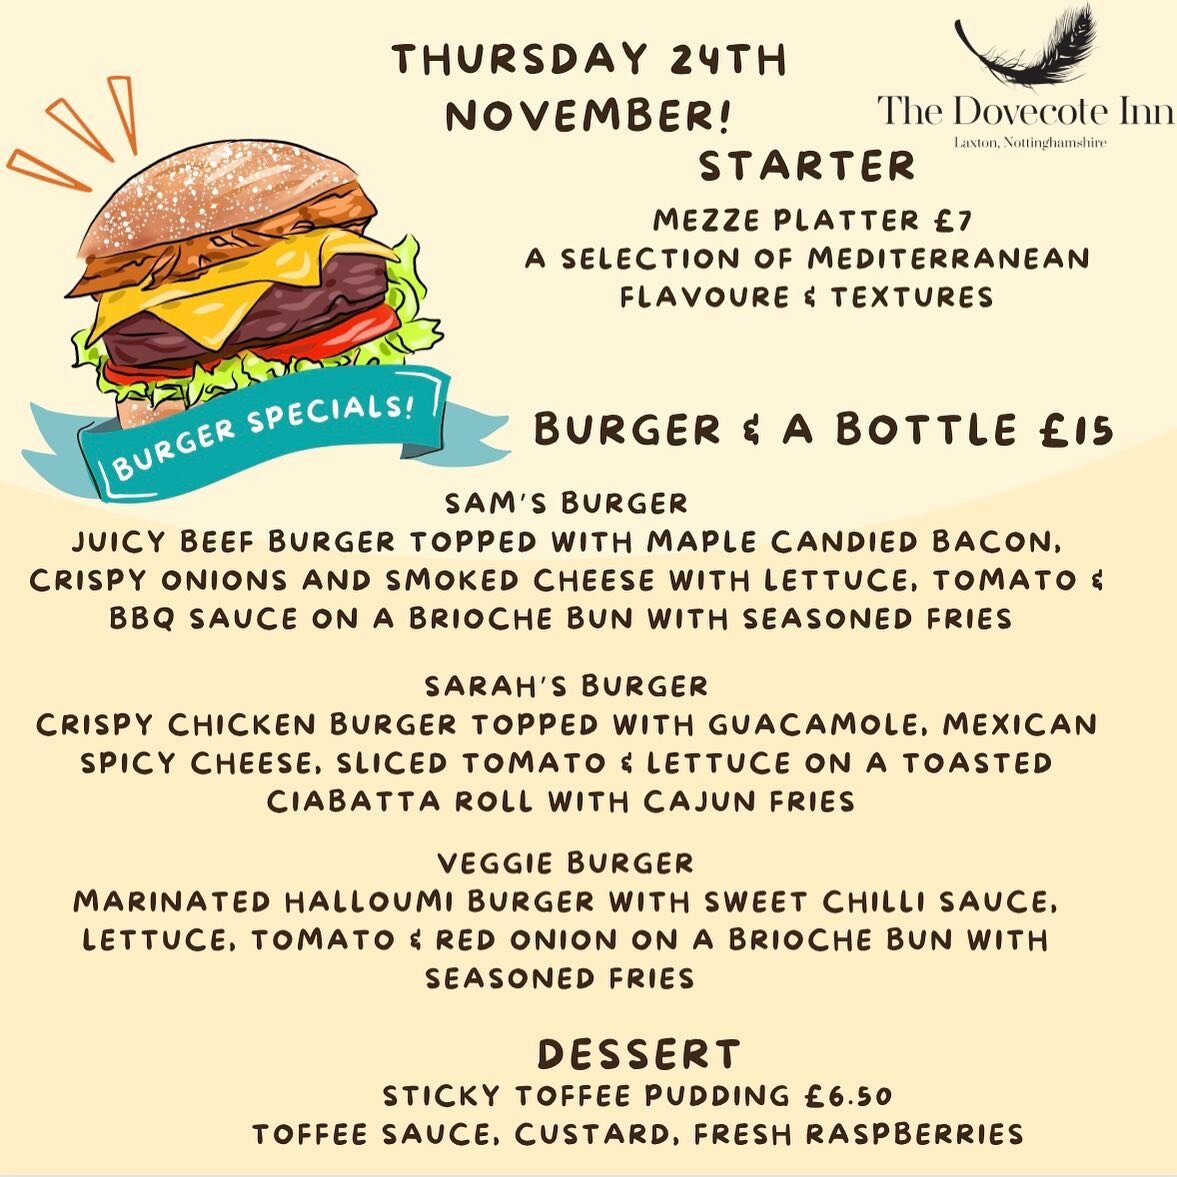 Burger Night specials this Thursday - Sam in the kitchen this week too with Head Chef Les on annual leave for a week! 🍔 

Join us on Thursday night and make the most of our Burger &amp; Bottle offer &pound;15 for your burger of choice and a bottle o